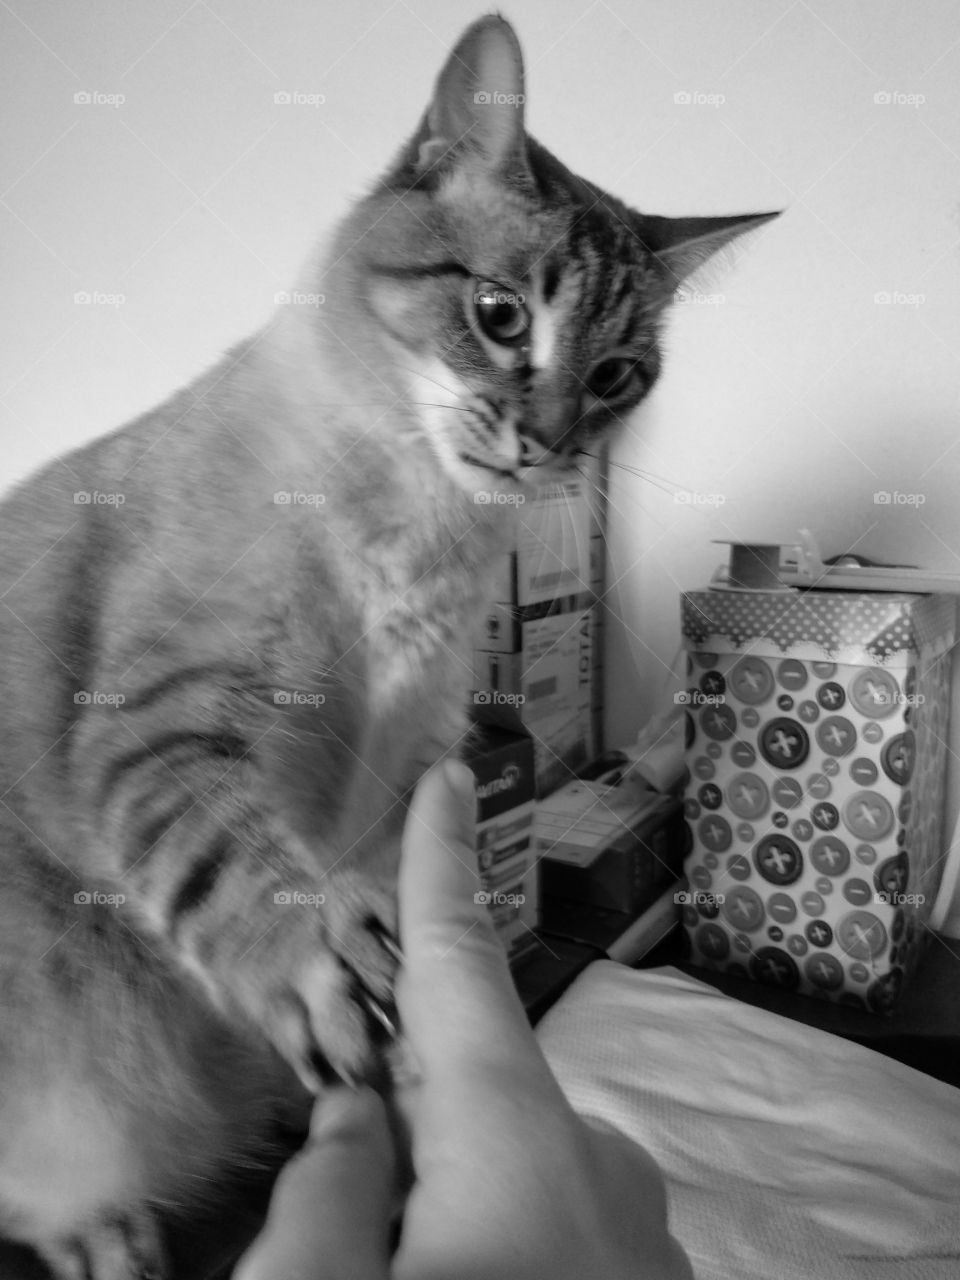 cat playing with finger b&w